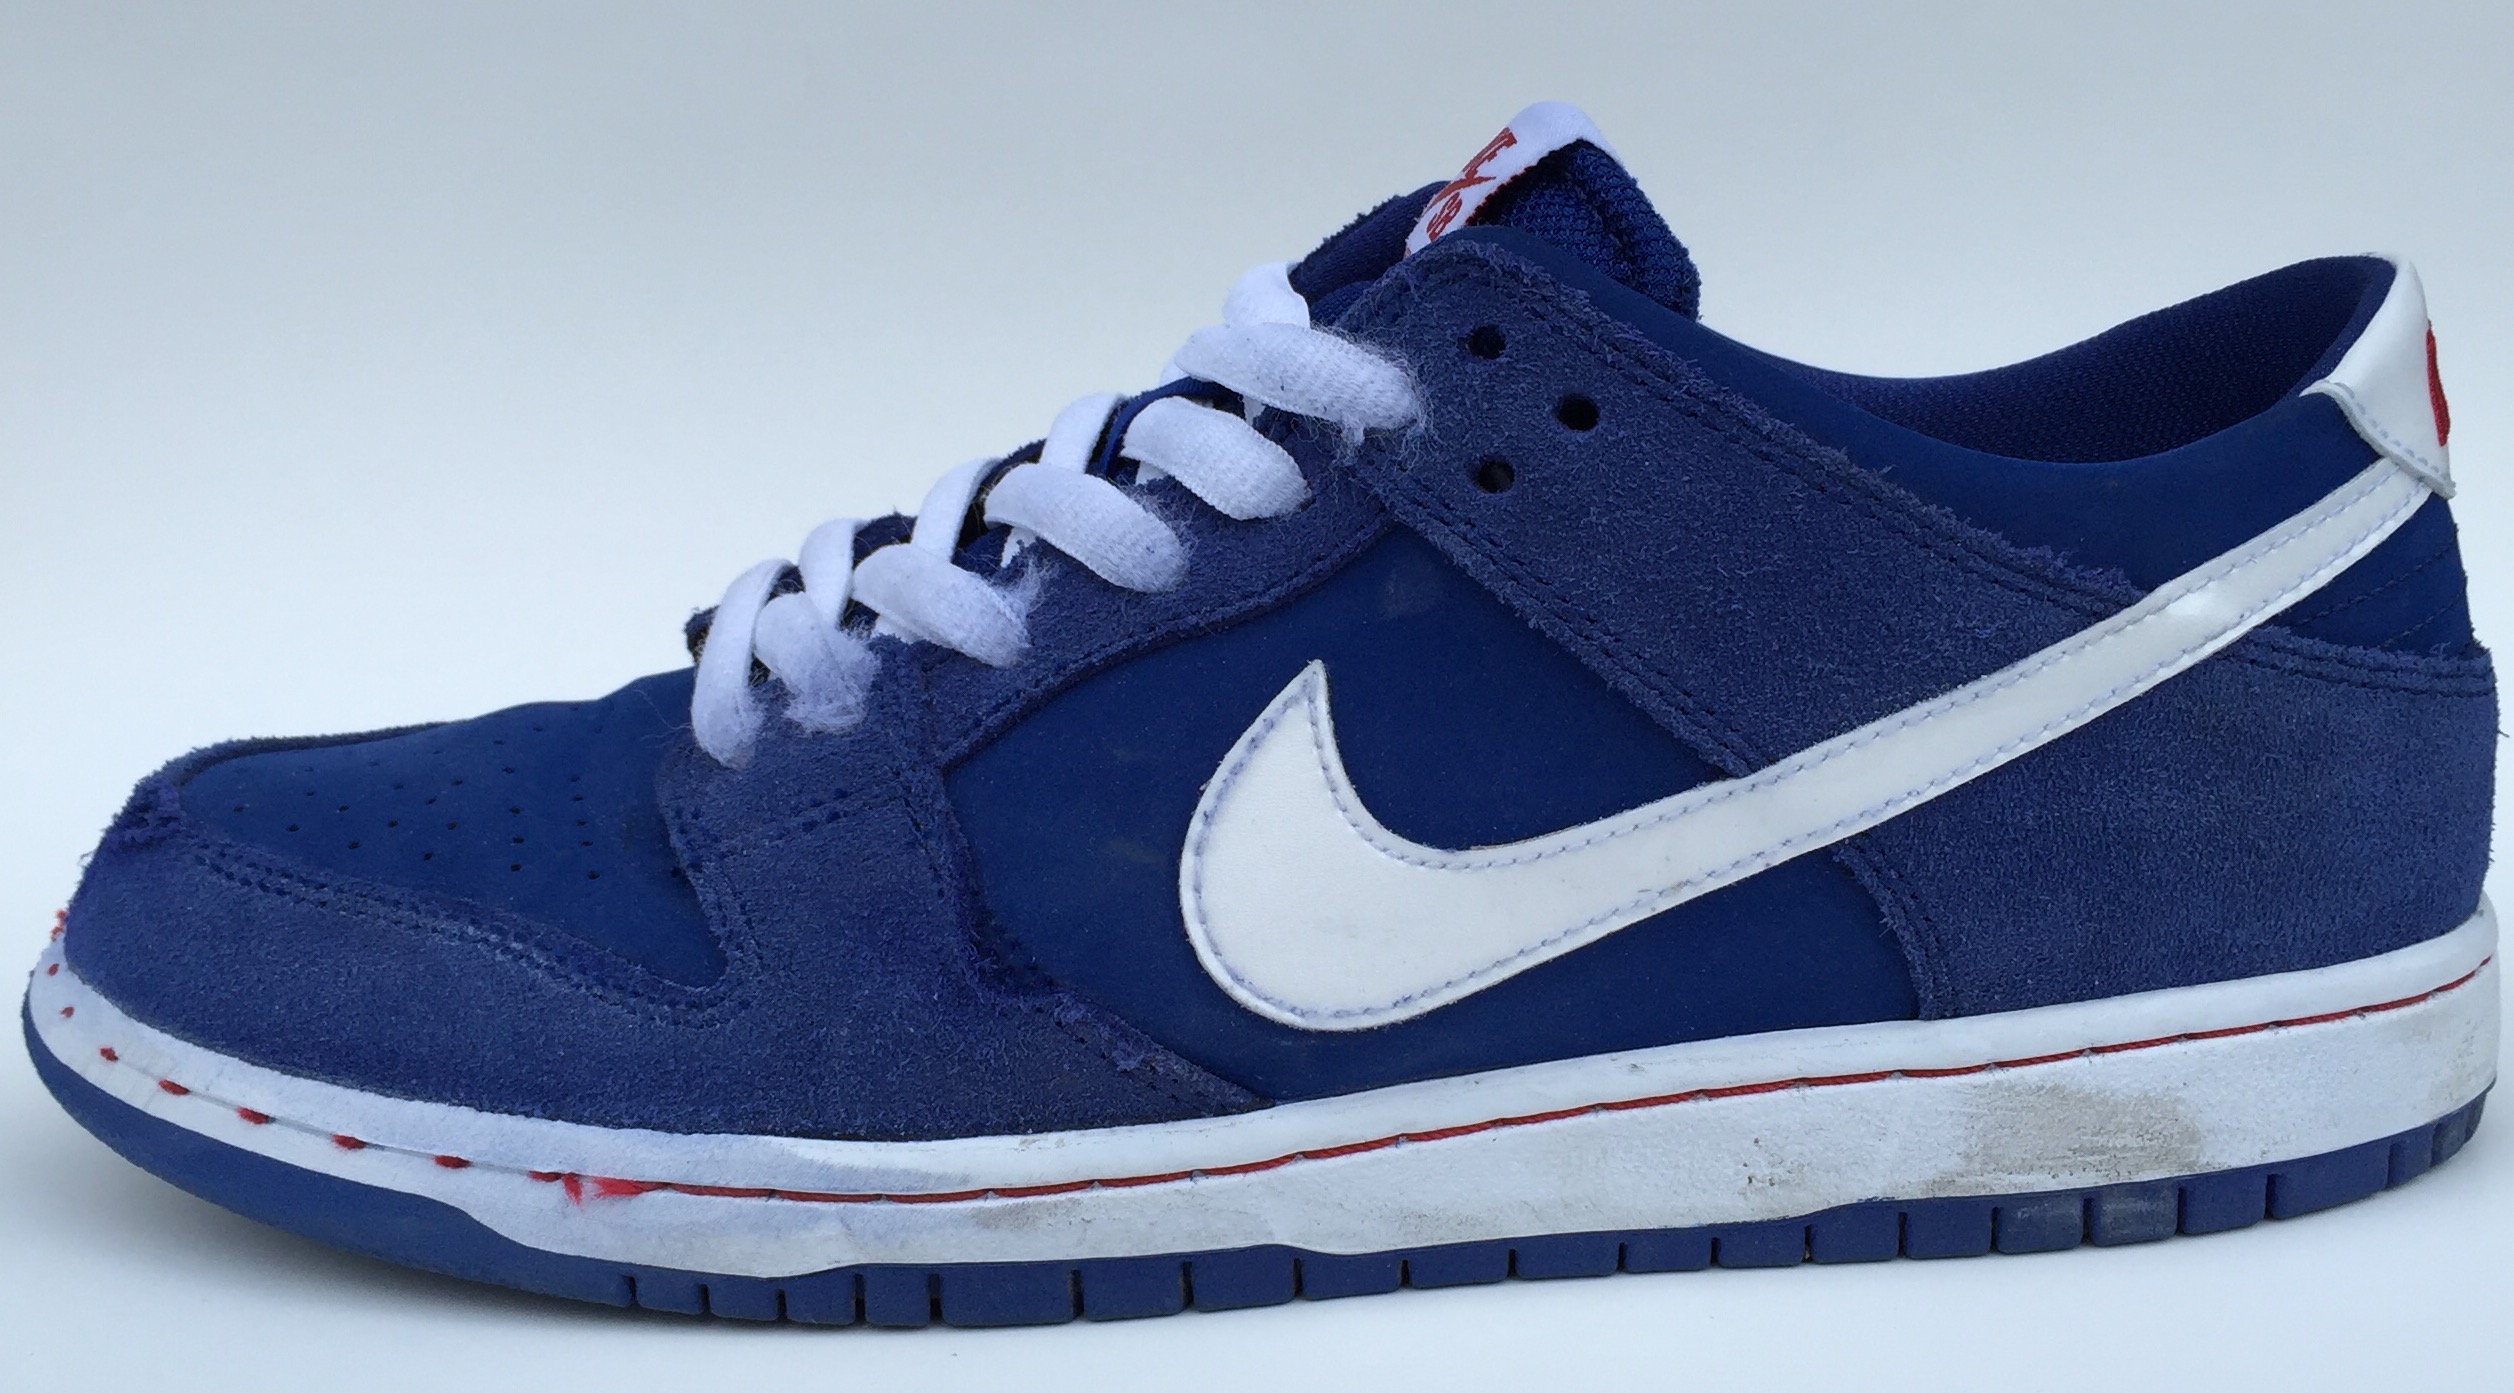 Canberra espontáneo . Nike SB Dunk Low Pro IW - Weartested - detailed skate shoe reviews